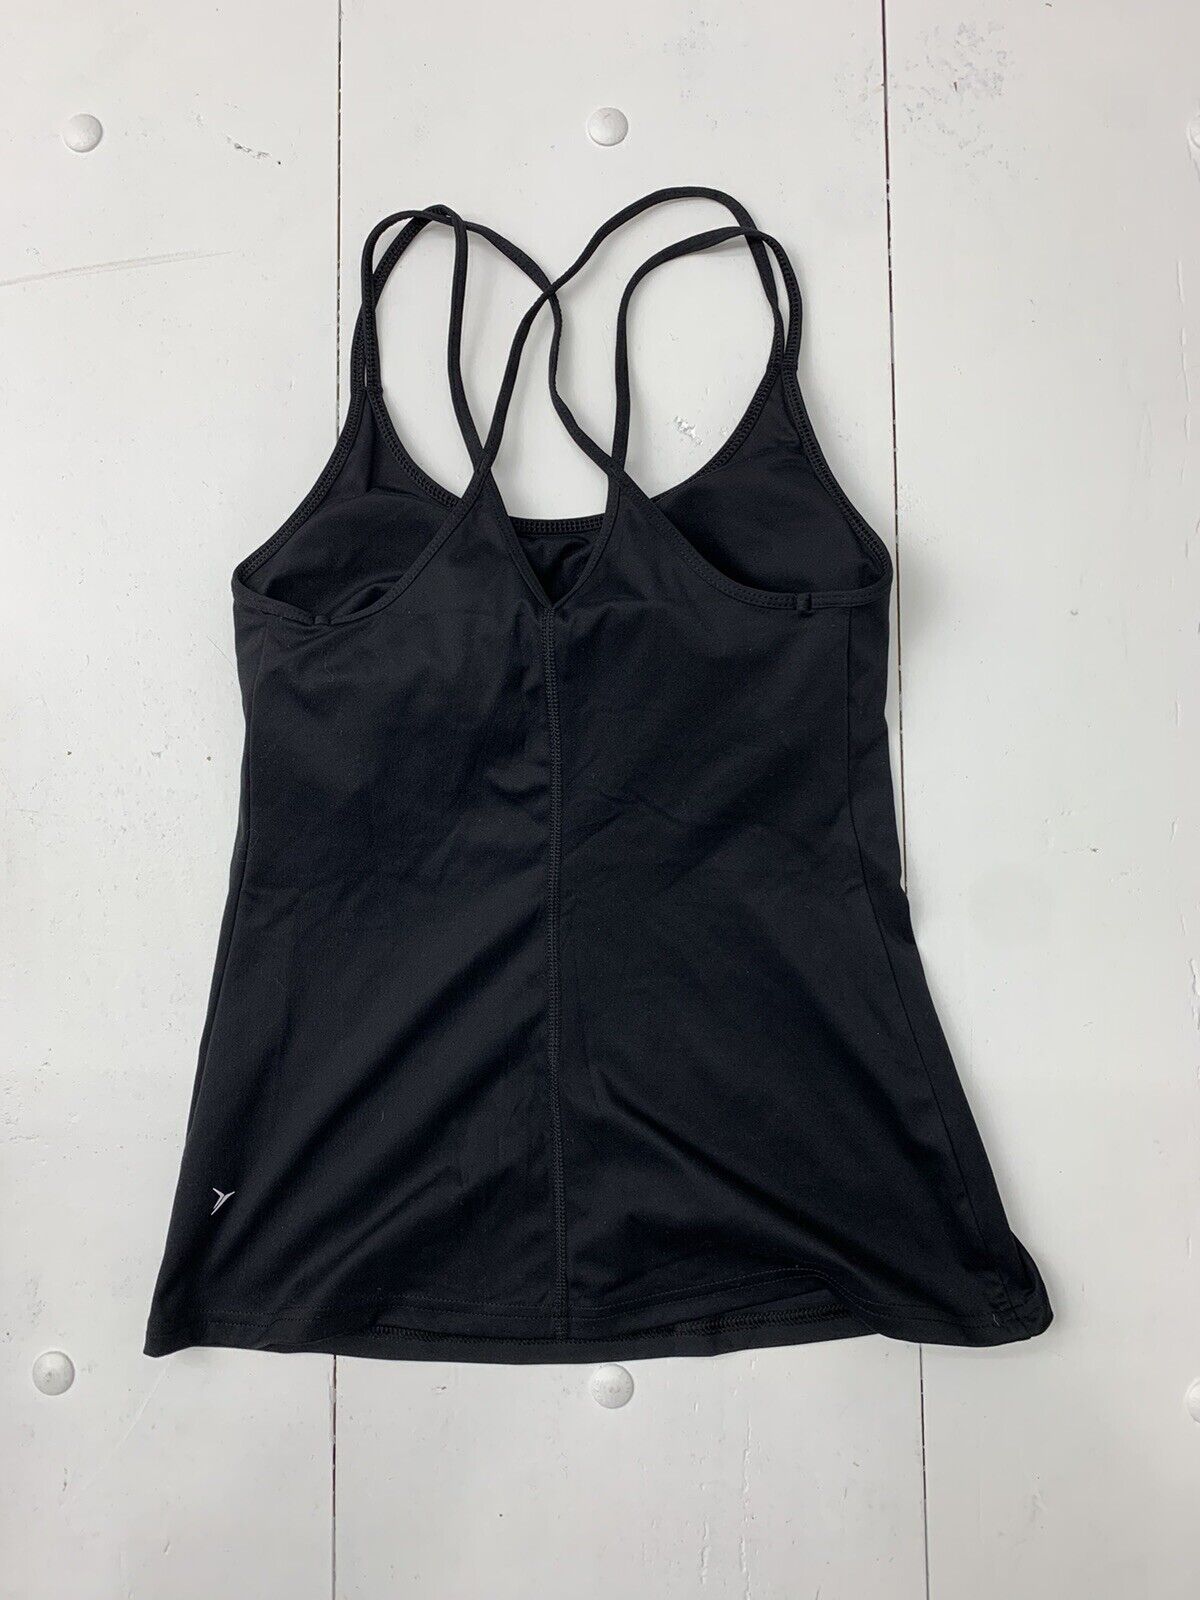 Old Navy Active Womens Black Tank Size Small - beyond exchange